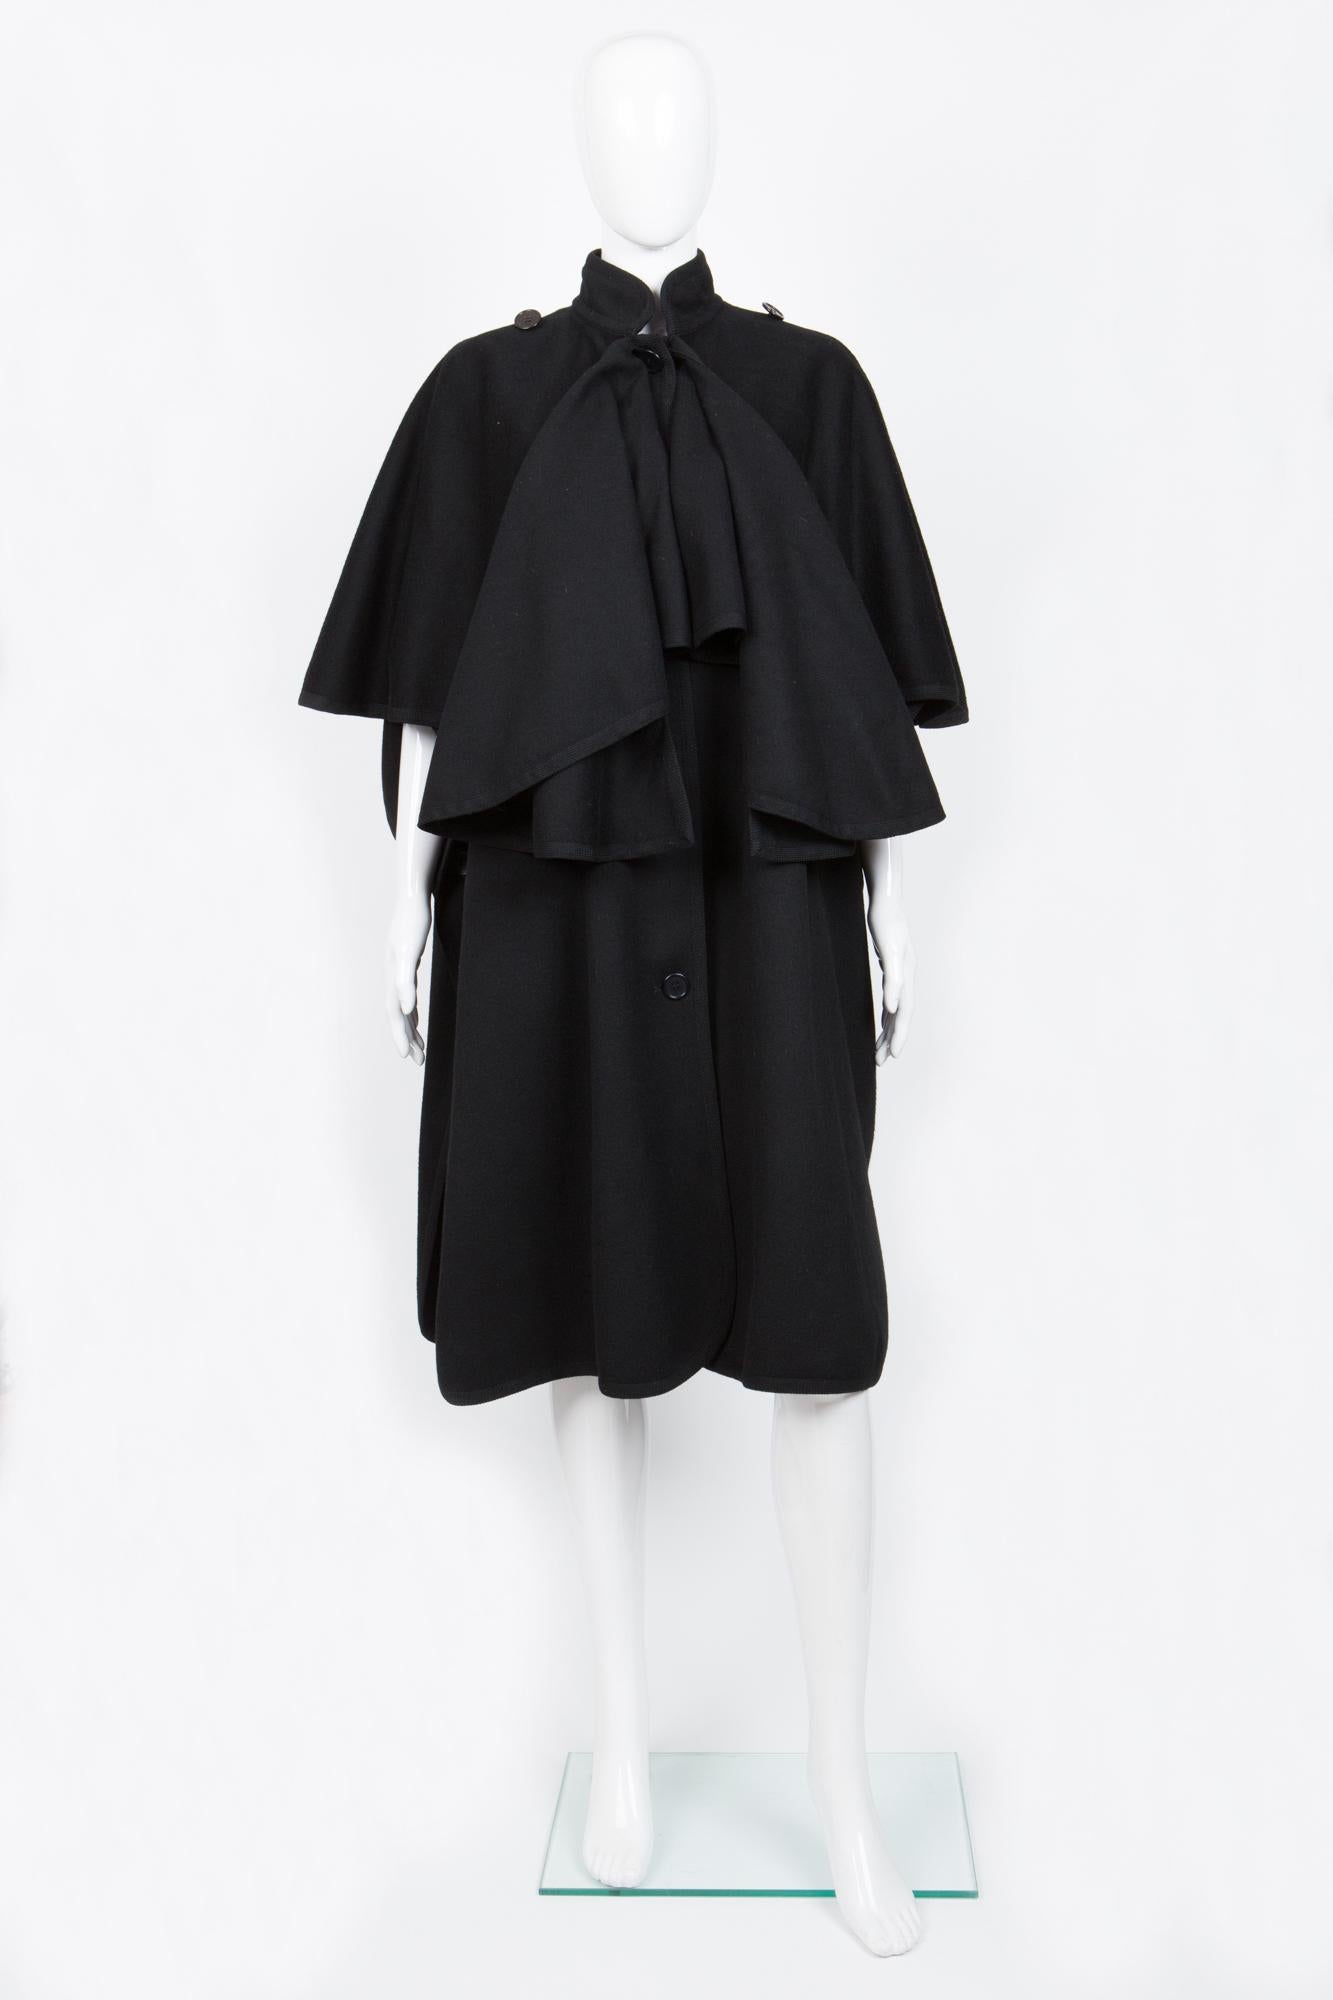 Saint Laurent black wool cape coat featuring a front button fastening, short sleeves, a braided edge and a mid-length. 100% wool
In excellent vintage condition. Made in France. 
Estimated size 38fr/US6 /UK10
We guarantee you will receive this